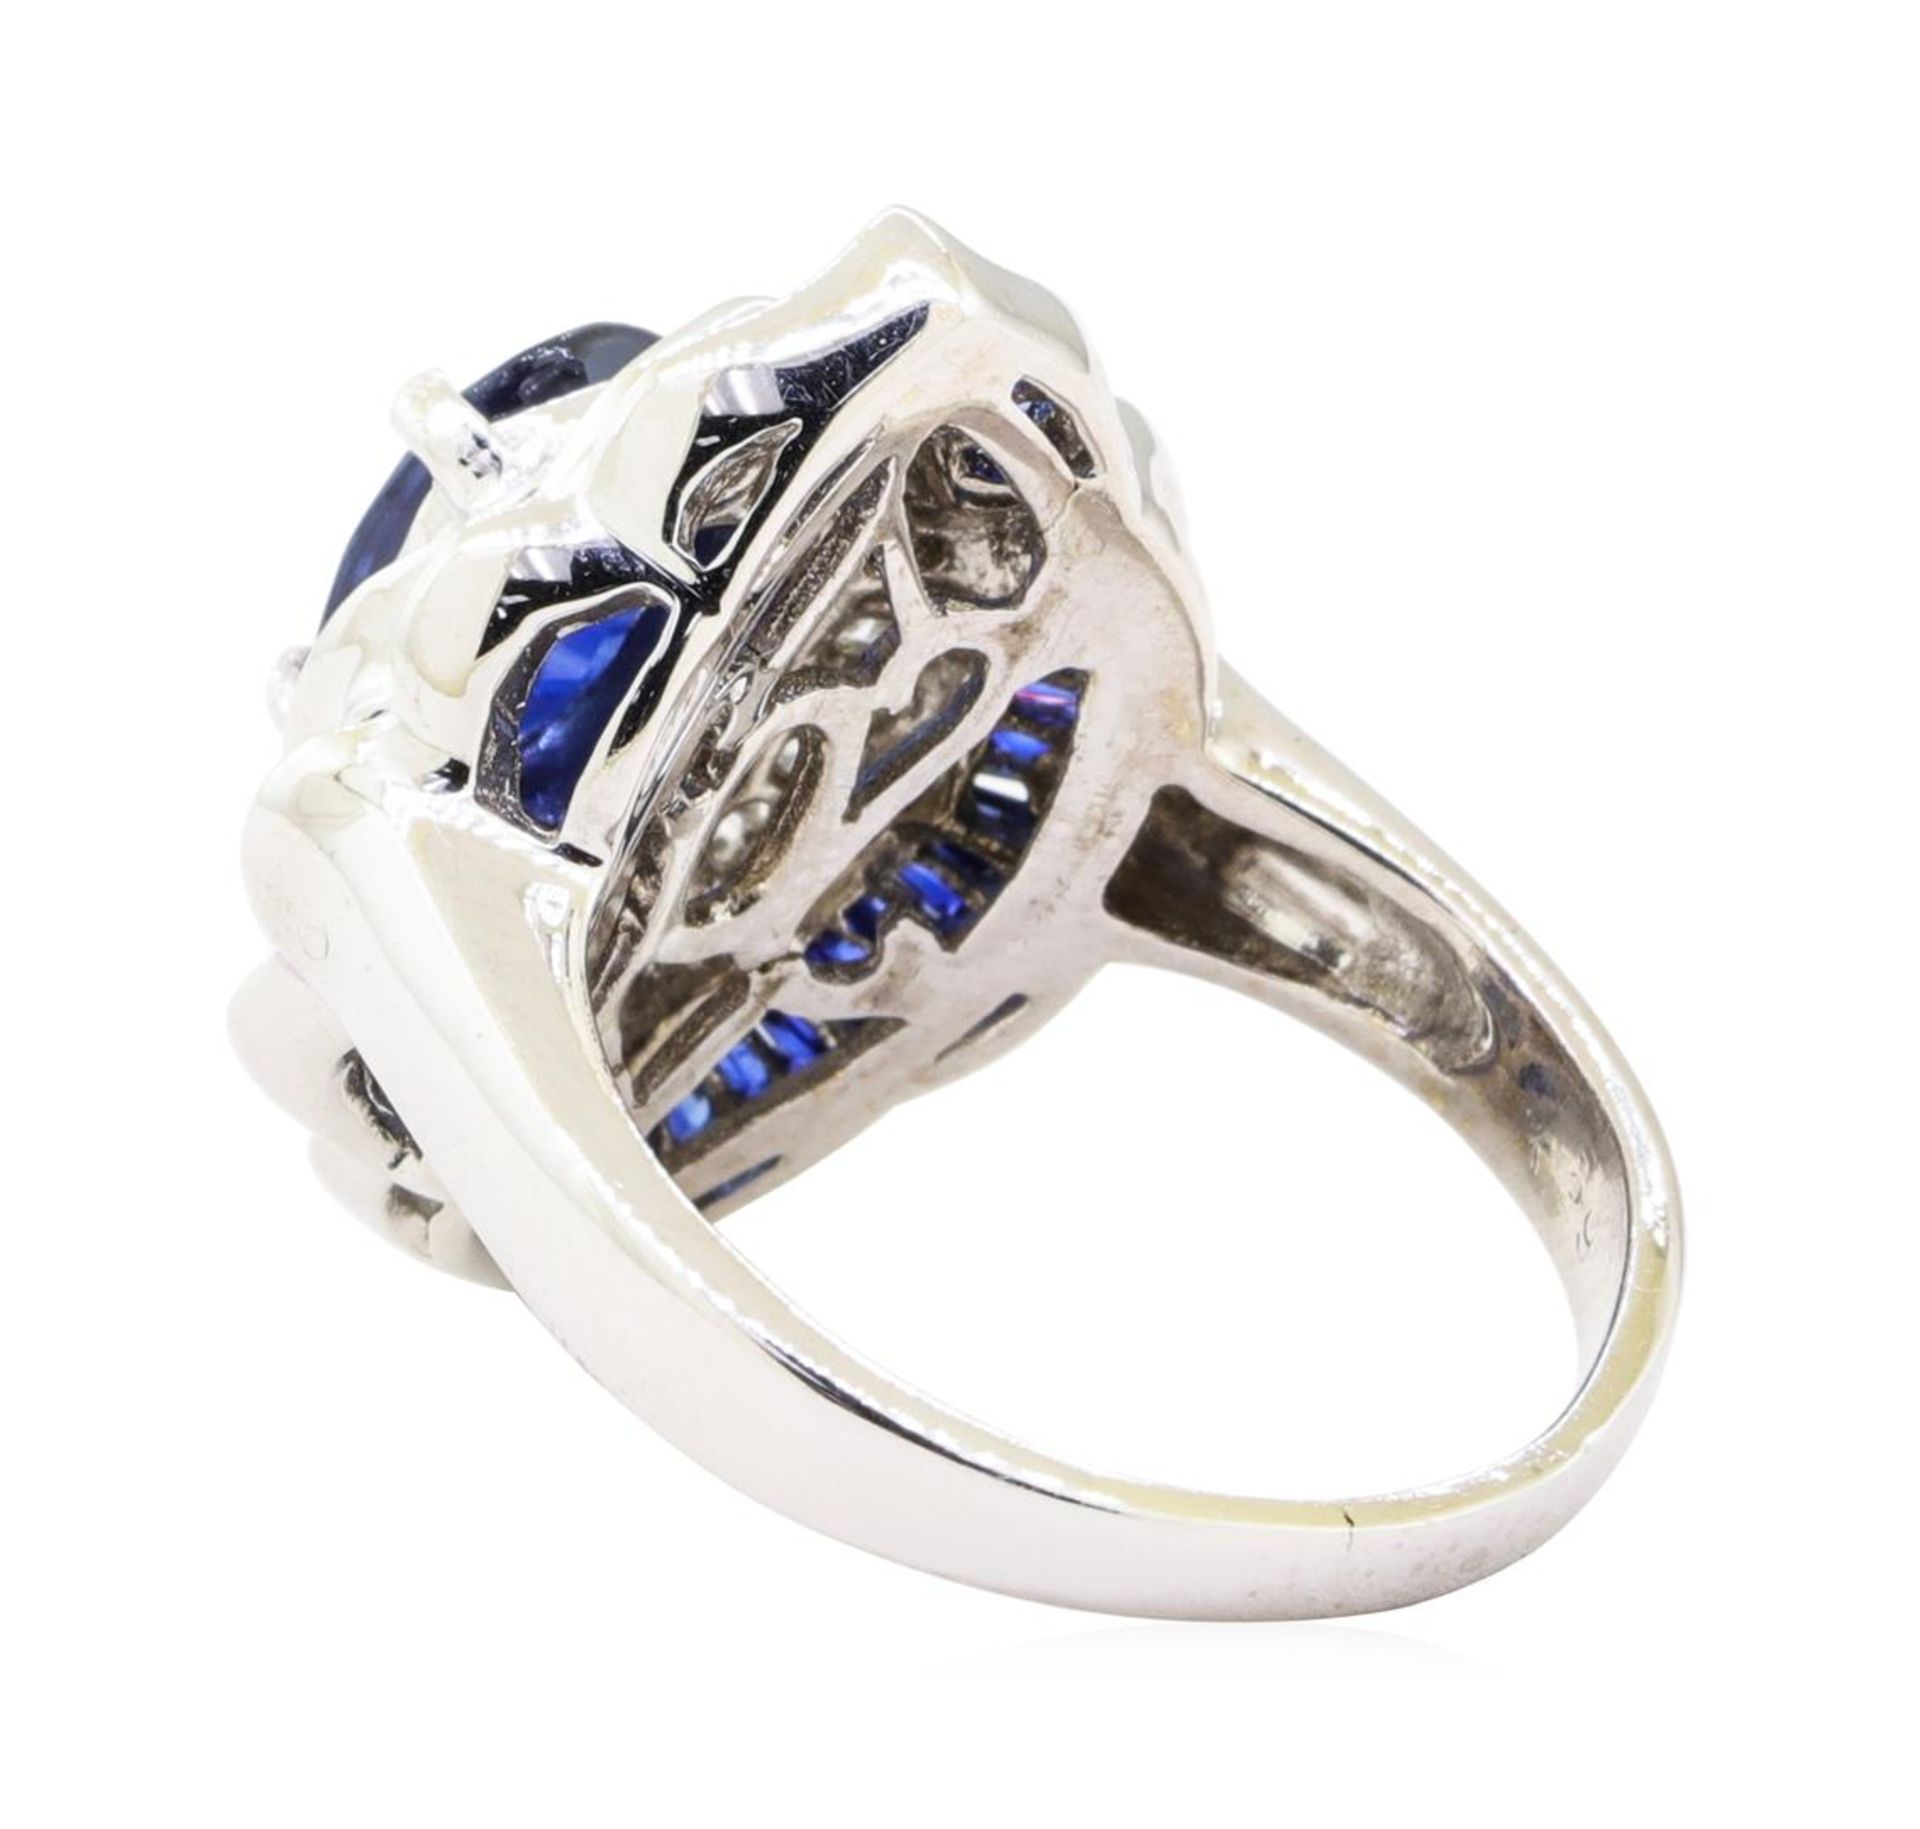 3.20 ctw Sapphire and Diamond Ring - 14KT White Gold - Image 3 of 5